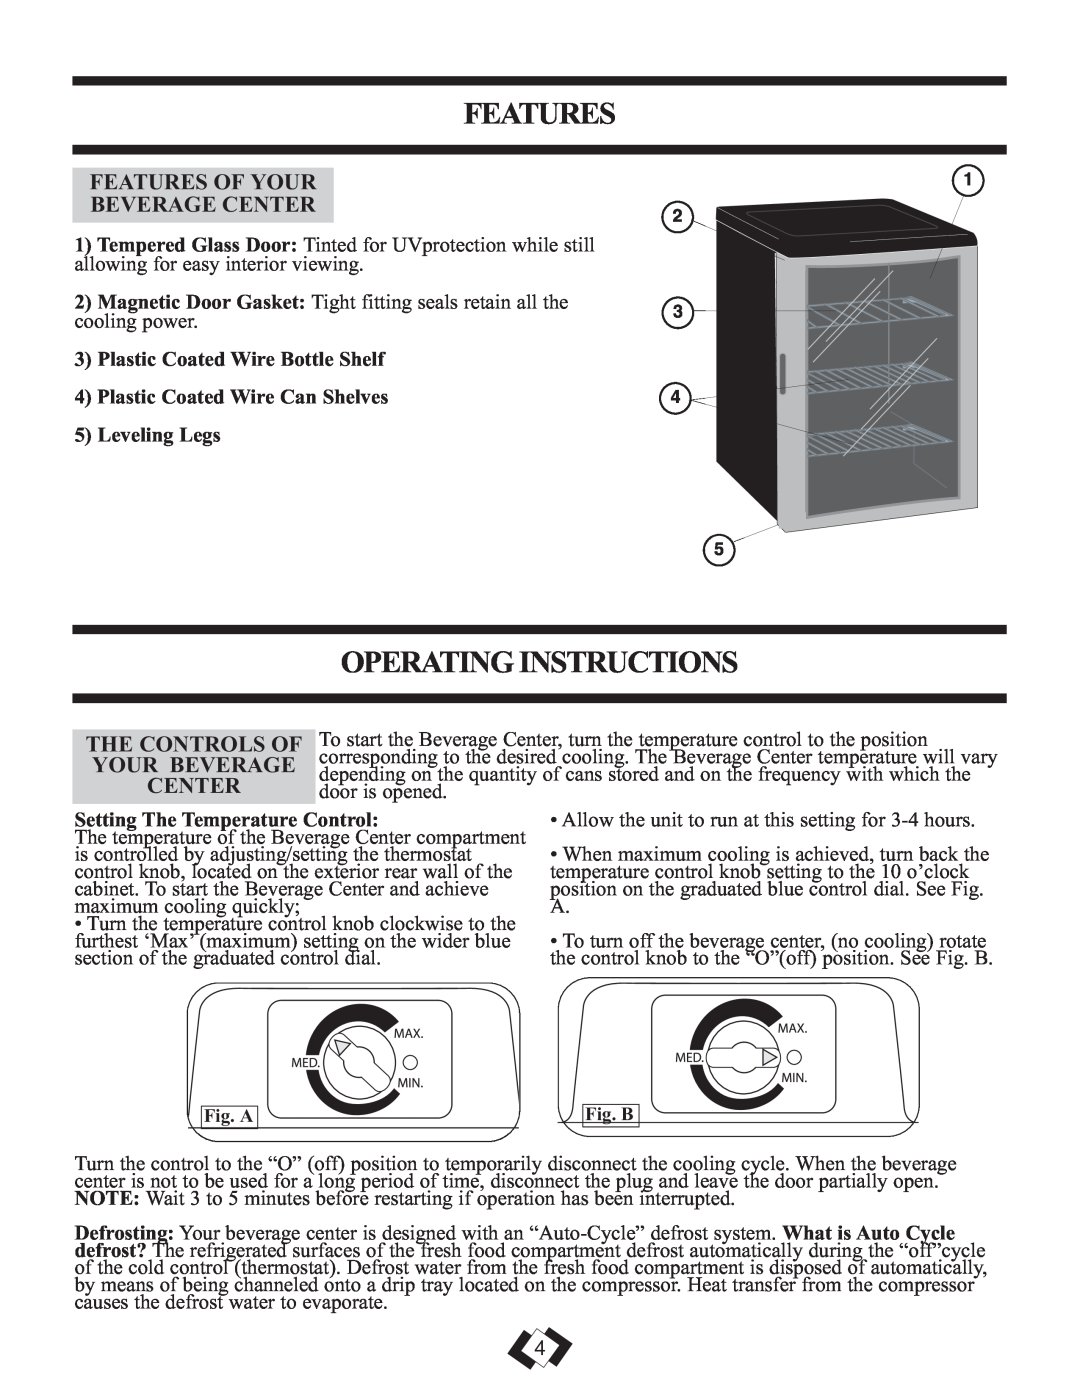 Danby DBC259BLP warranty Operating Instructions, Features Of Your Beverage Center, The Controls Of Your Beverage Center 